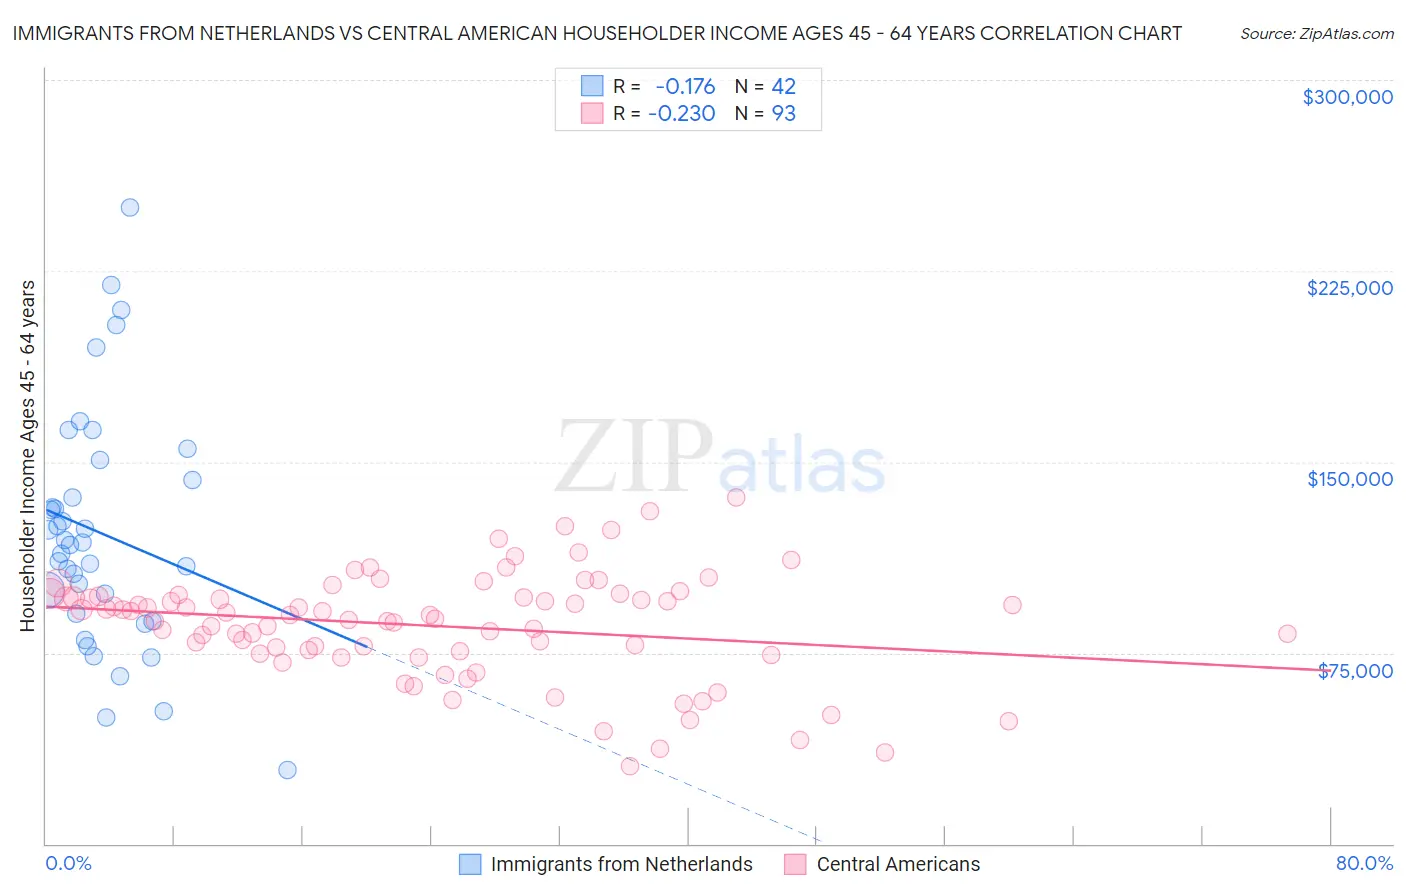 Immigrants from Netherlands vs Central American Householder Income Ages 45 - 64 years